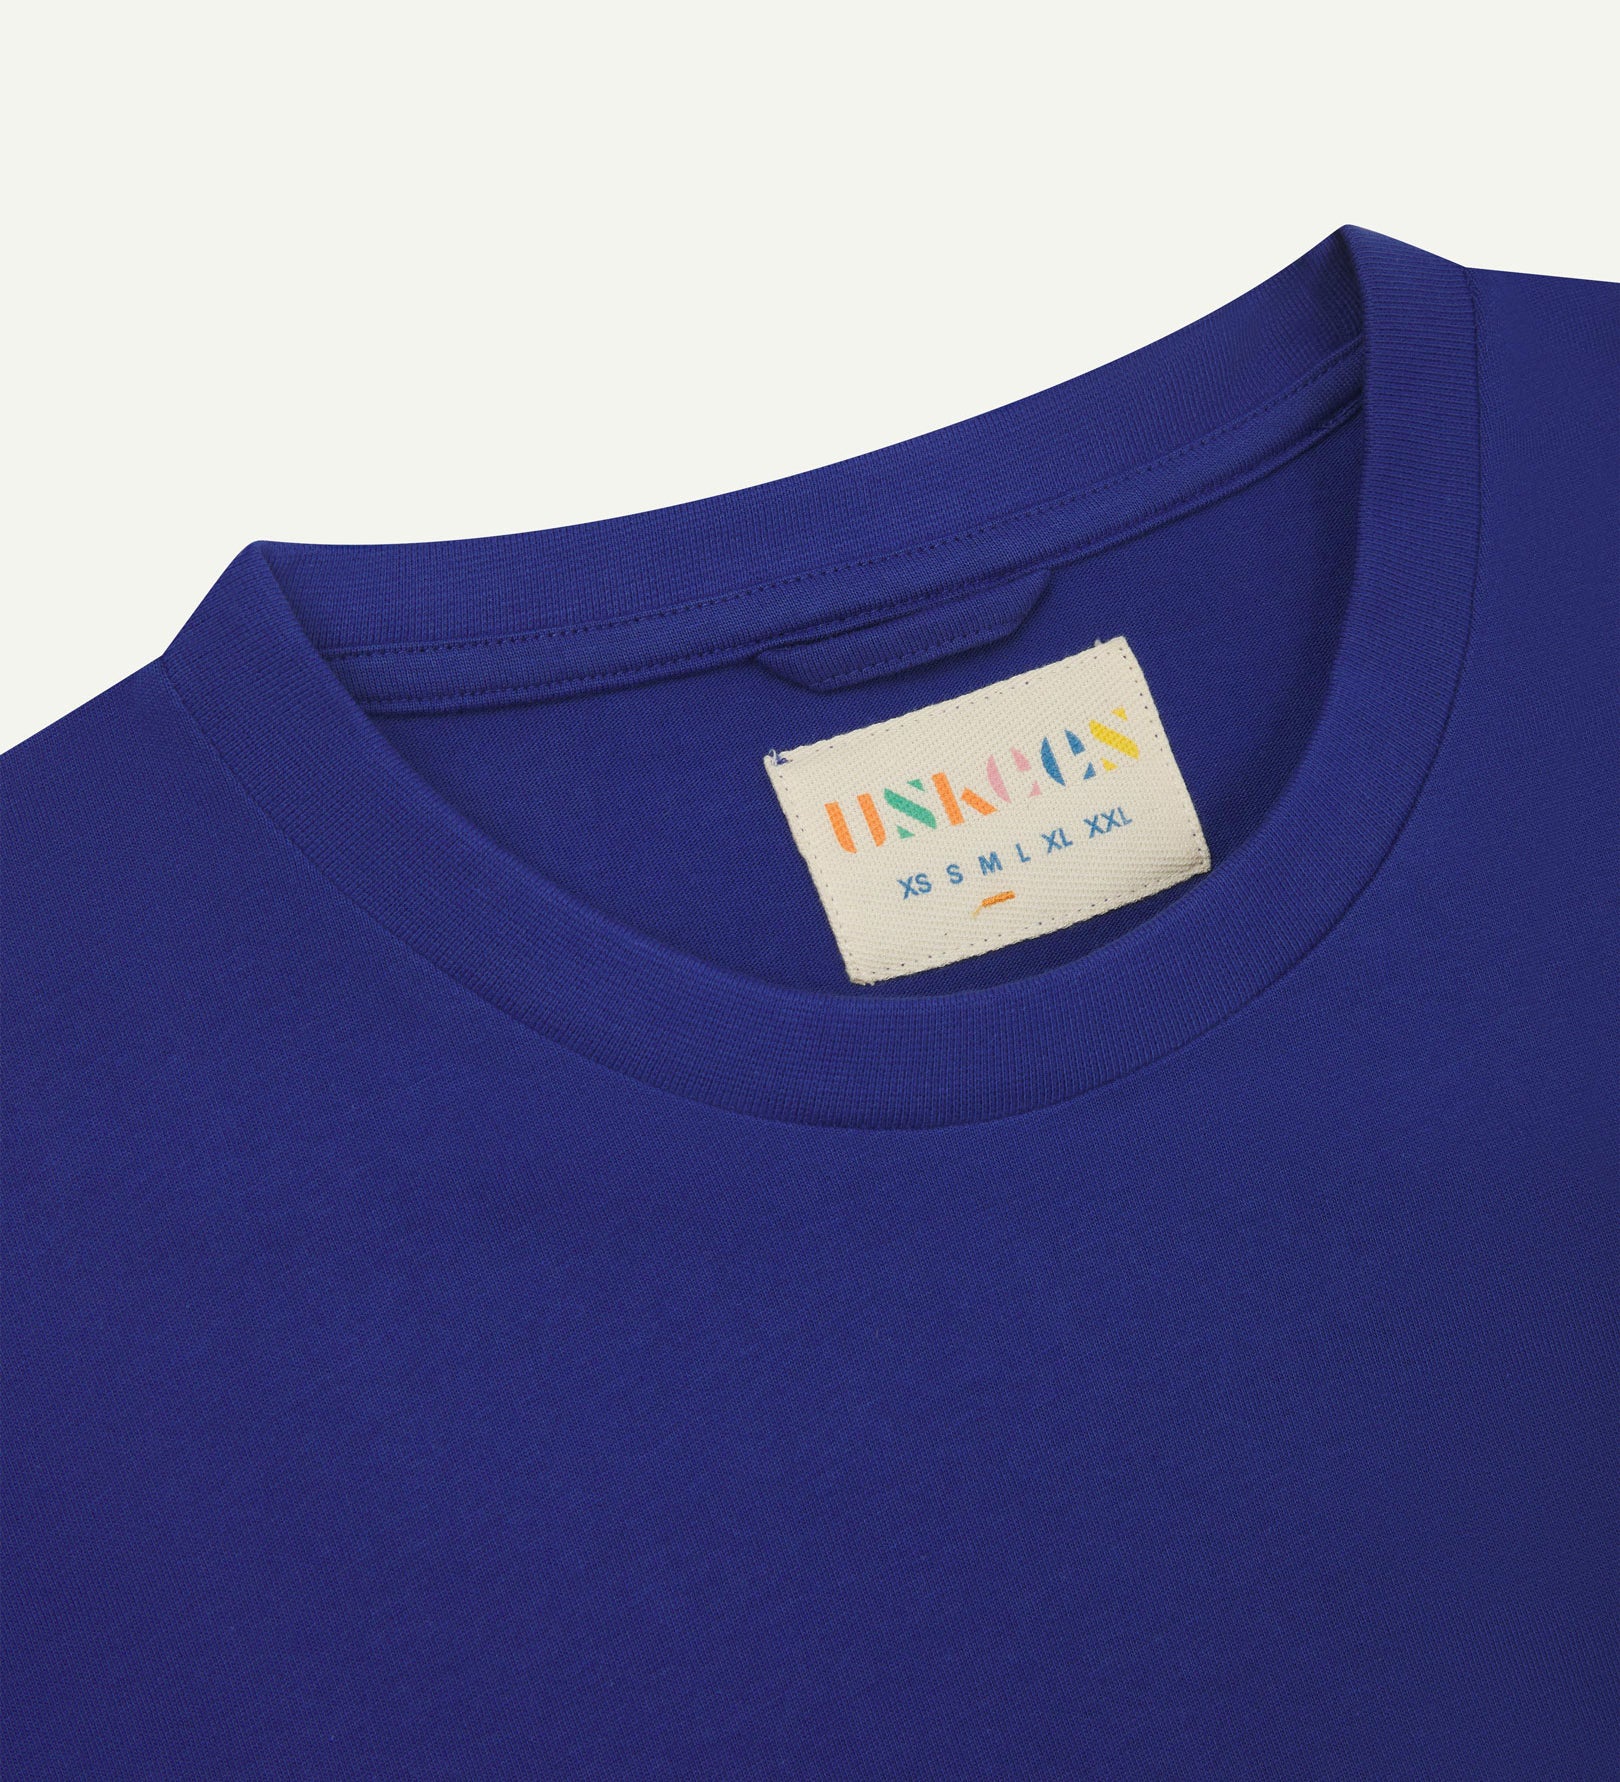 Neckline close-up of Uskees ultra blue organic cotton T-shirt showing hanging loop and branding label.